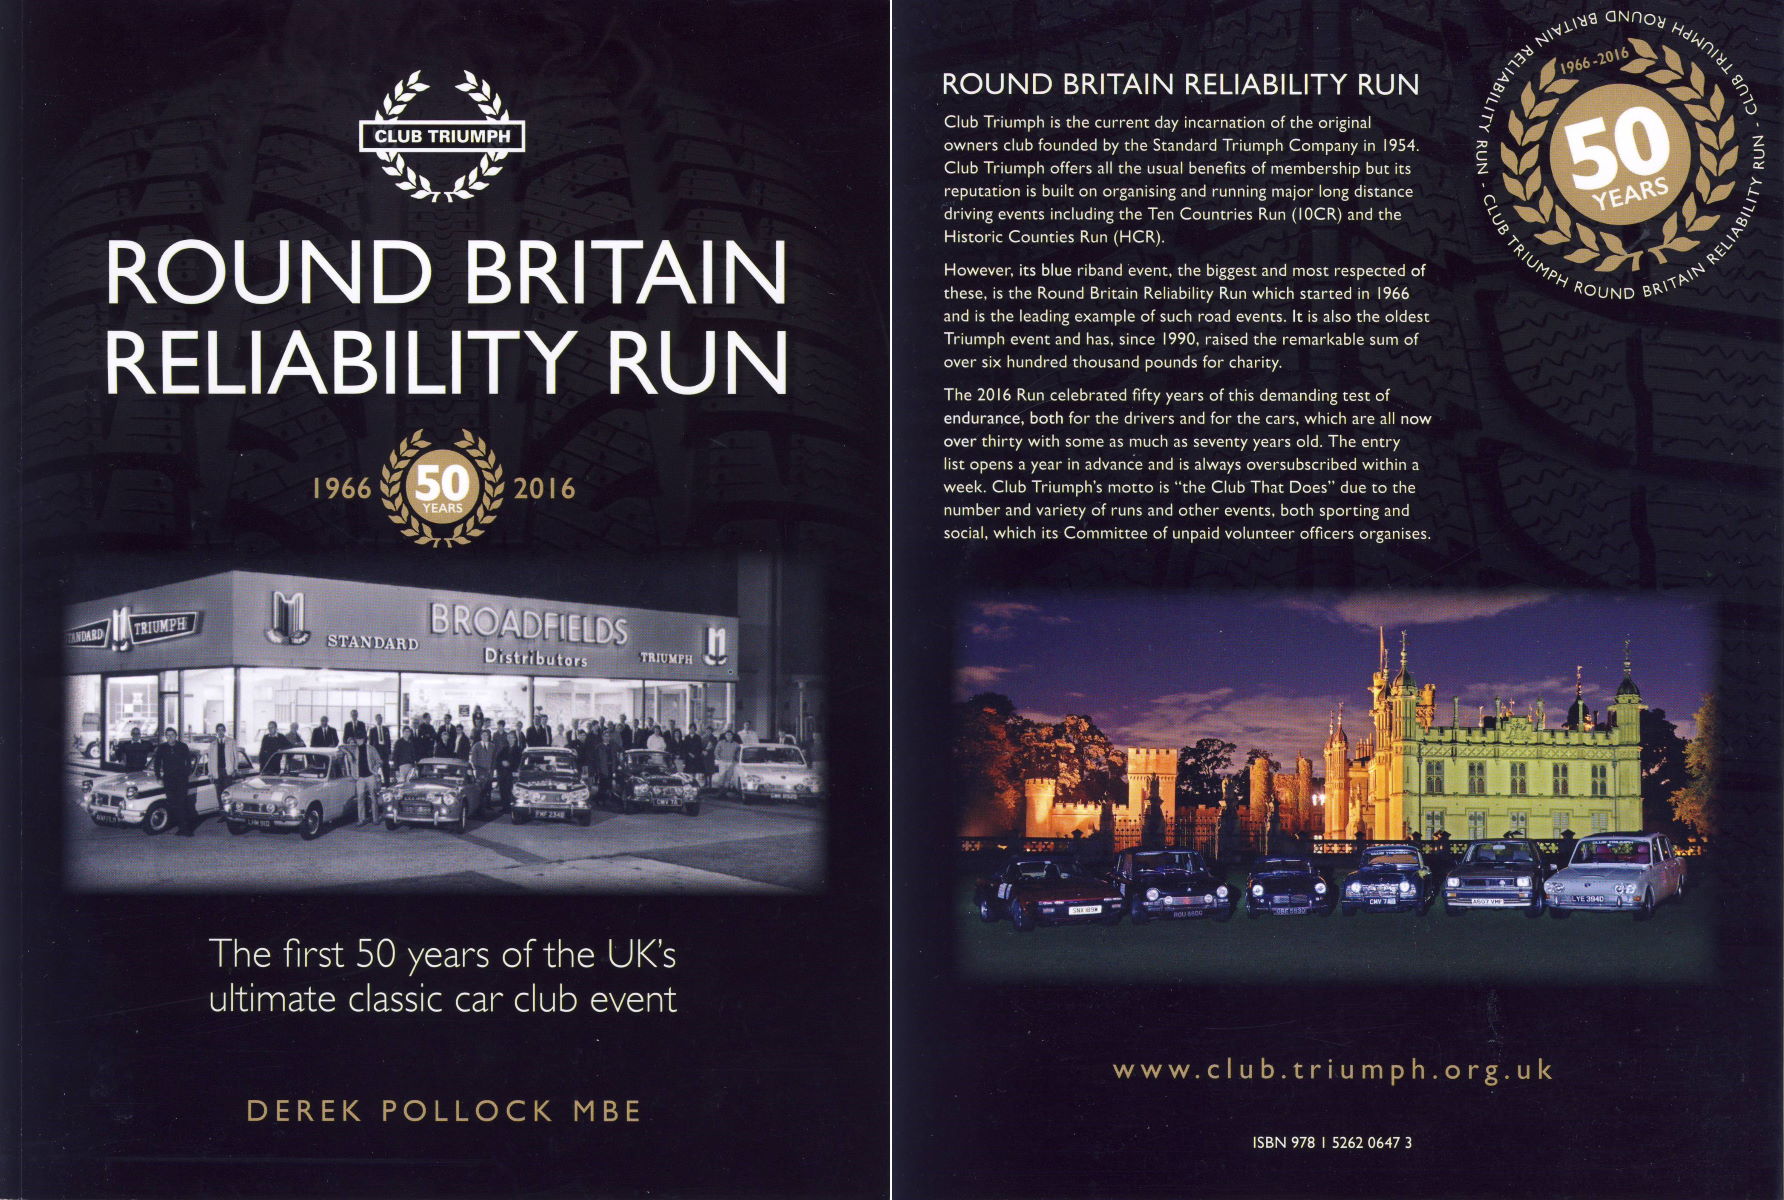 Round Britain Reliability Run. The first 50 years of the UK